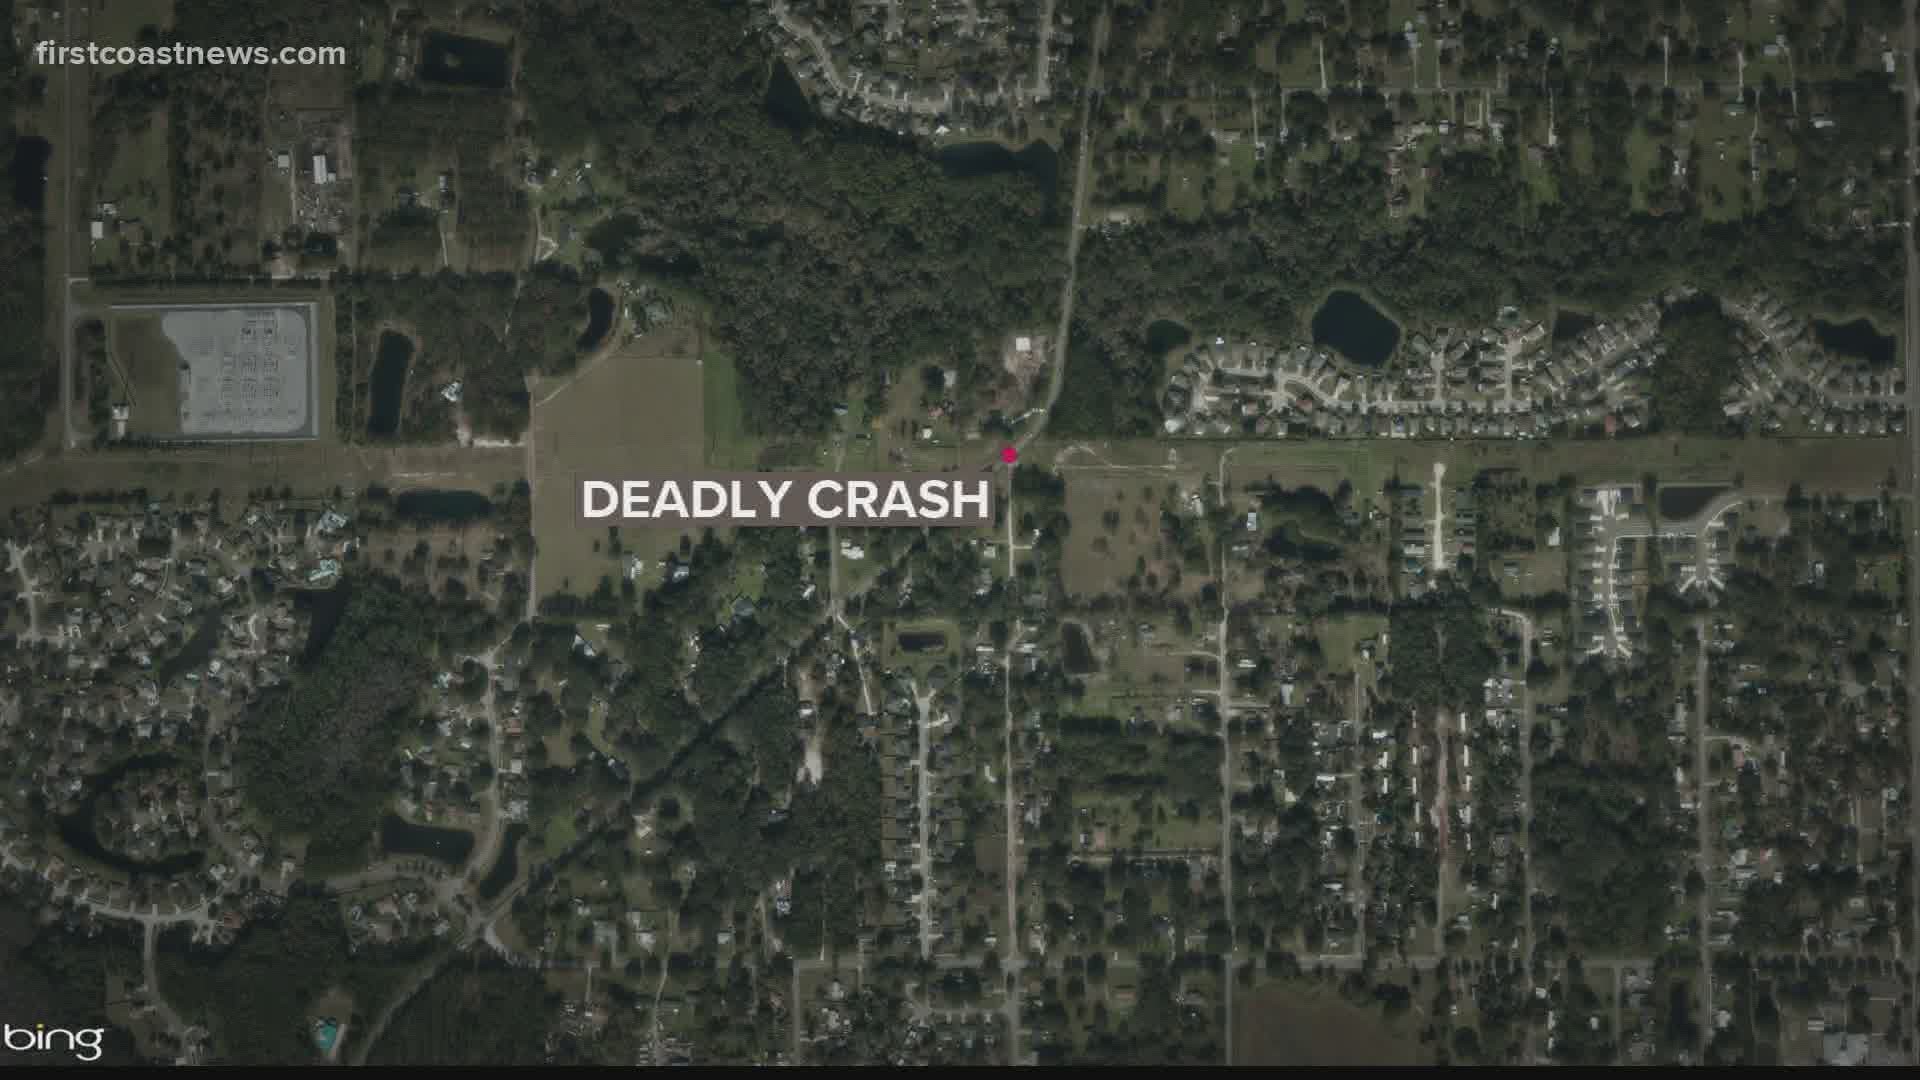 The Jacksonville Fire Rescue Department pronounced the driver dead at the scene. He was wearing a helmet, police said.